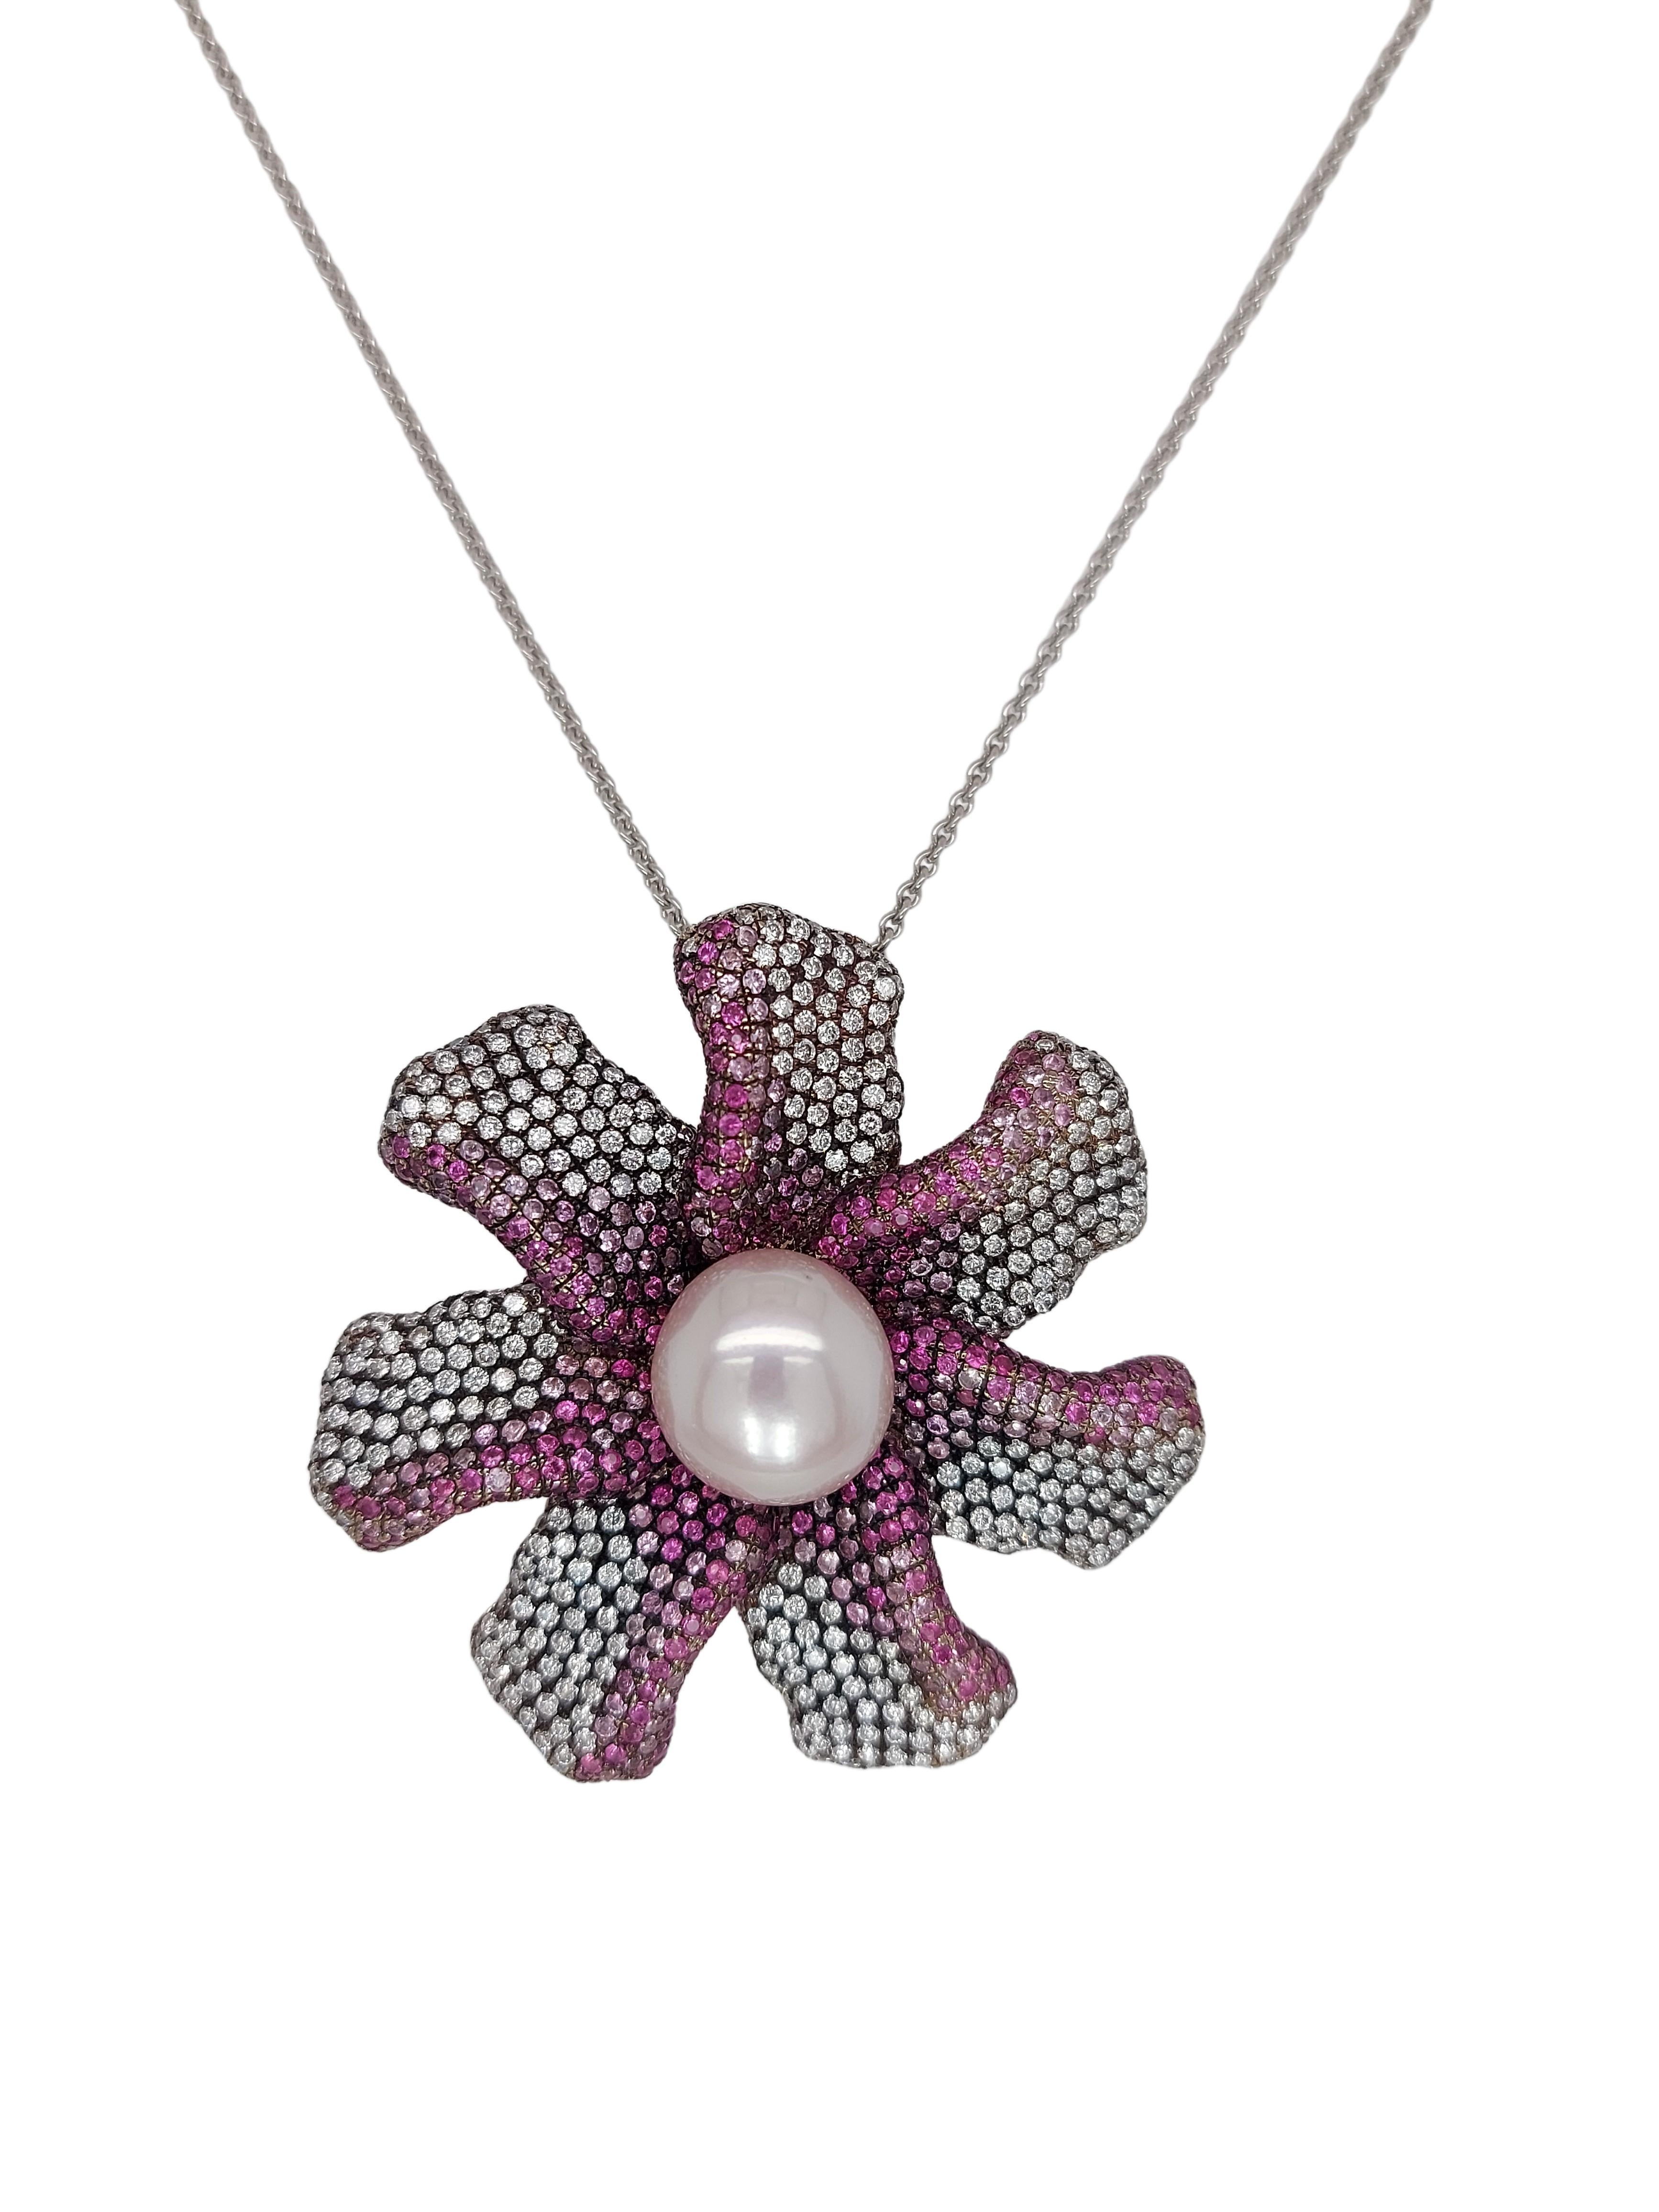 Amazing 18kt white Gold Flower Pendant / Necklace with 2.83ct Diamonds, 4.40ct Sapphire, Pearl

A real work of art as well from our goldsmith as from the setter to make the color grading and setting.

One of a kind ,unique piece !

Diamonds: